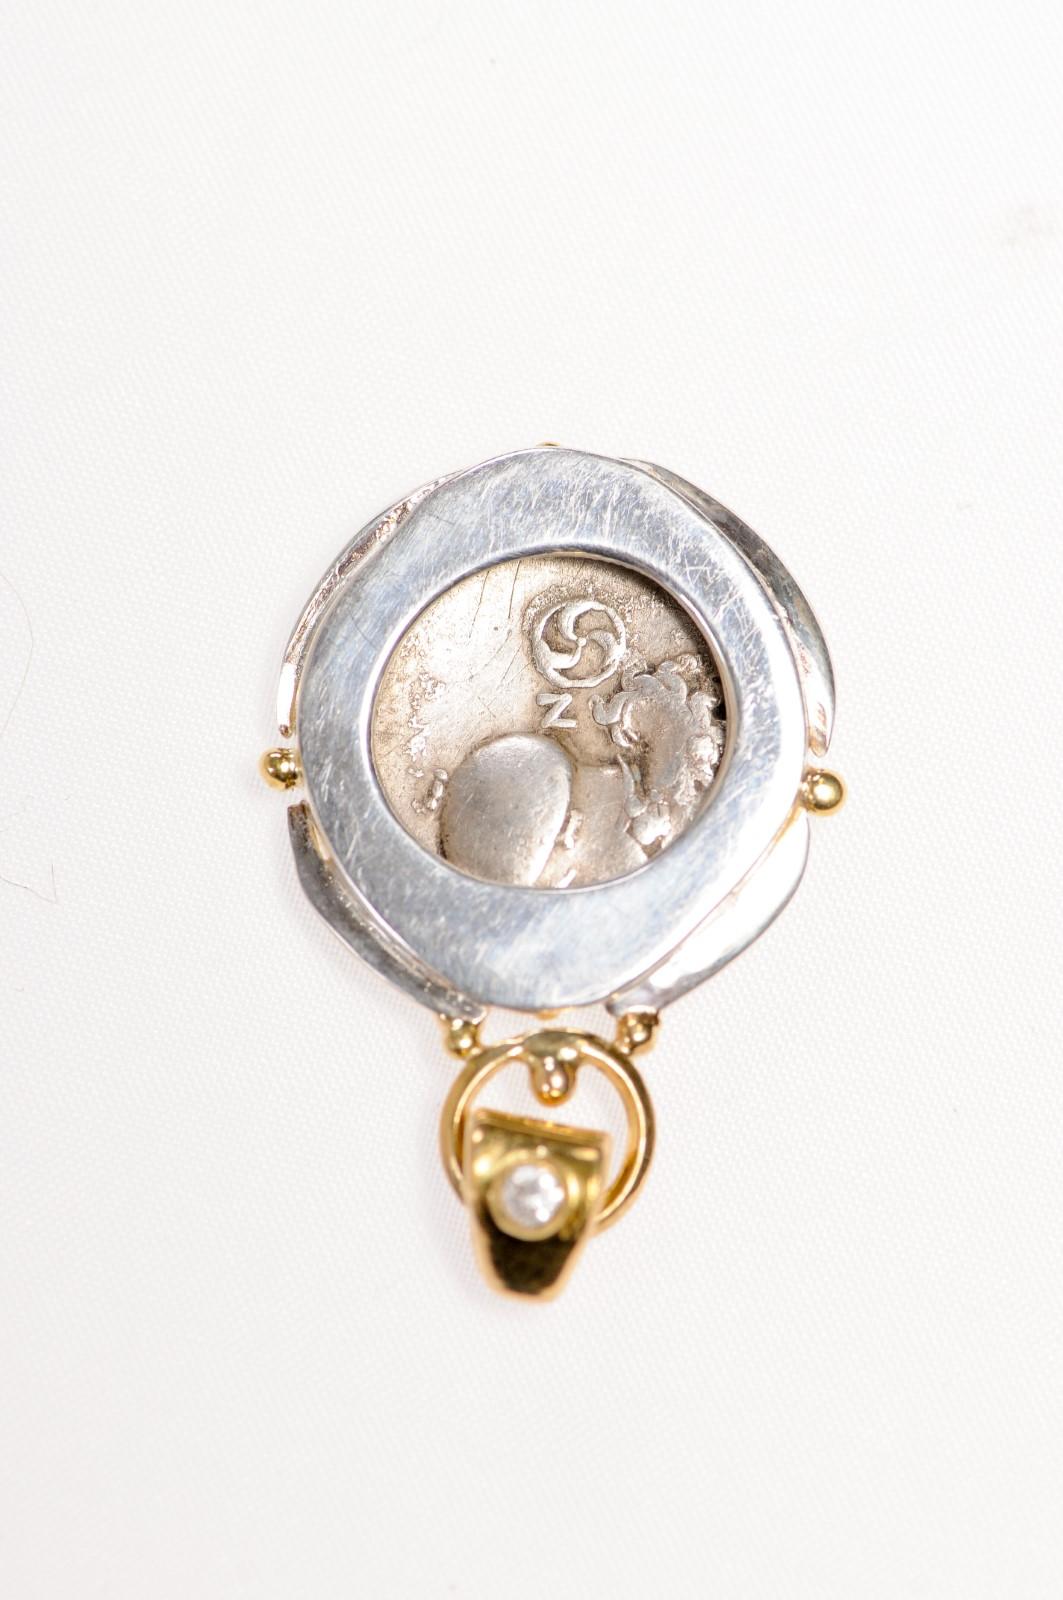 Ancient Pegasus Coin in 22 kt Gold Pendant (pendant only) For Sale 7